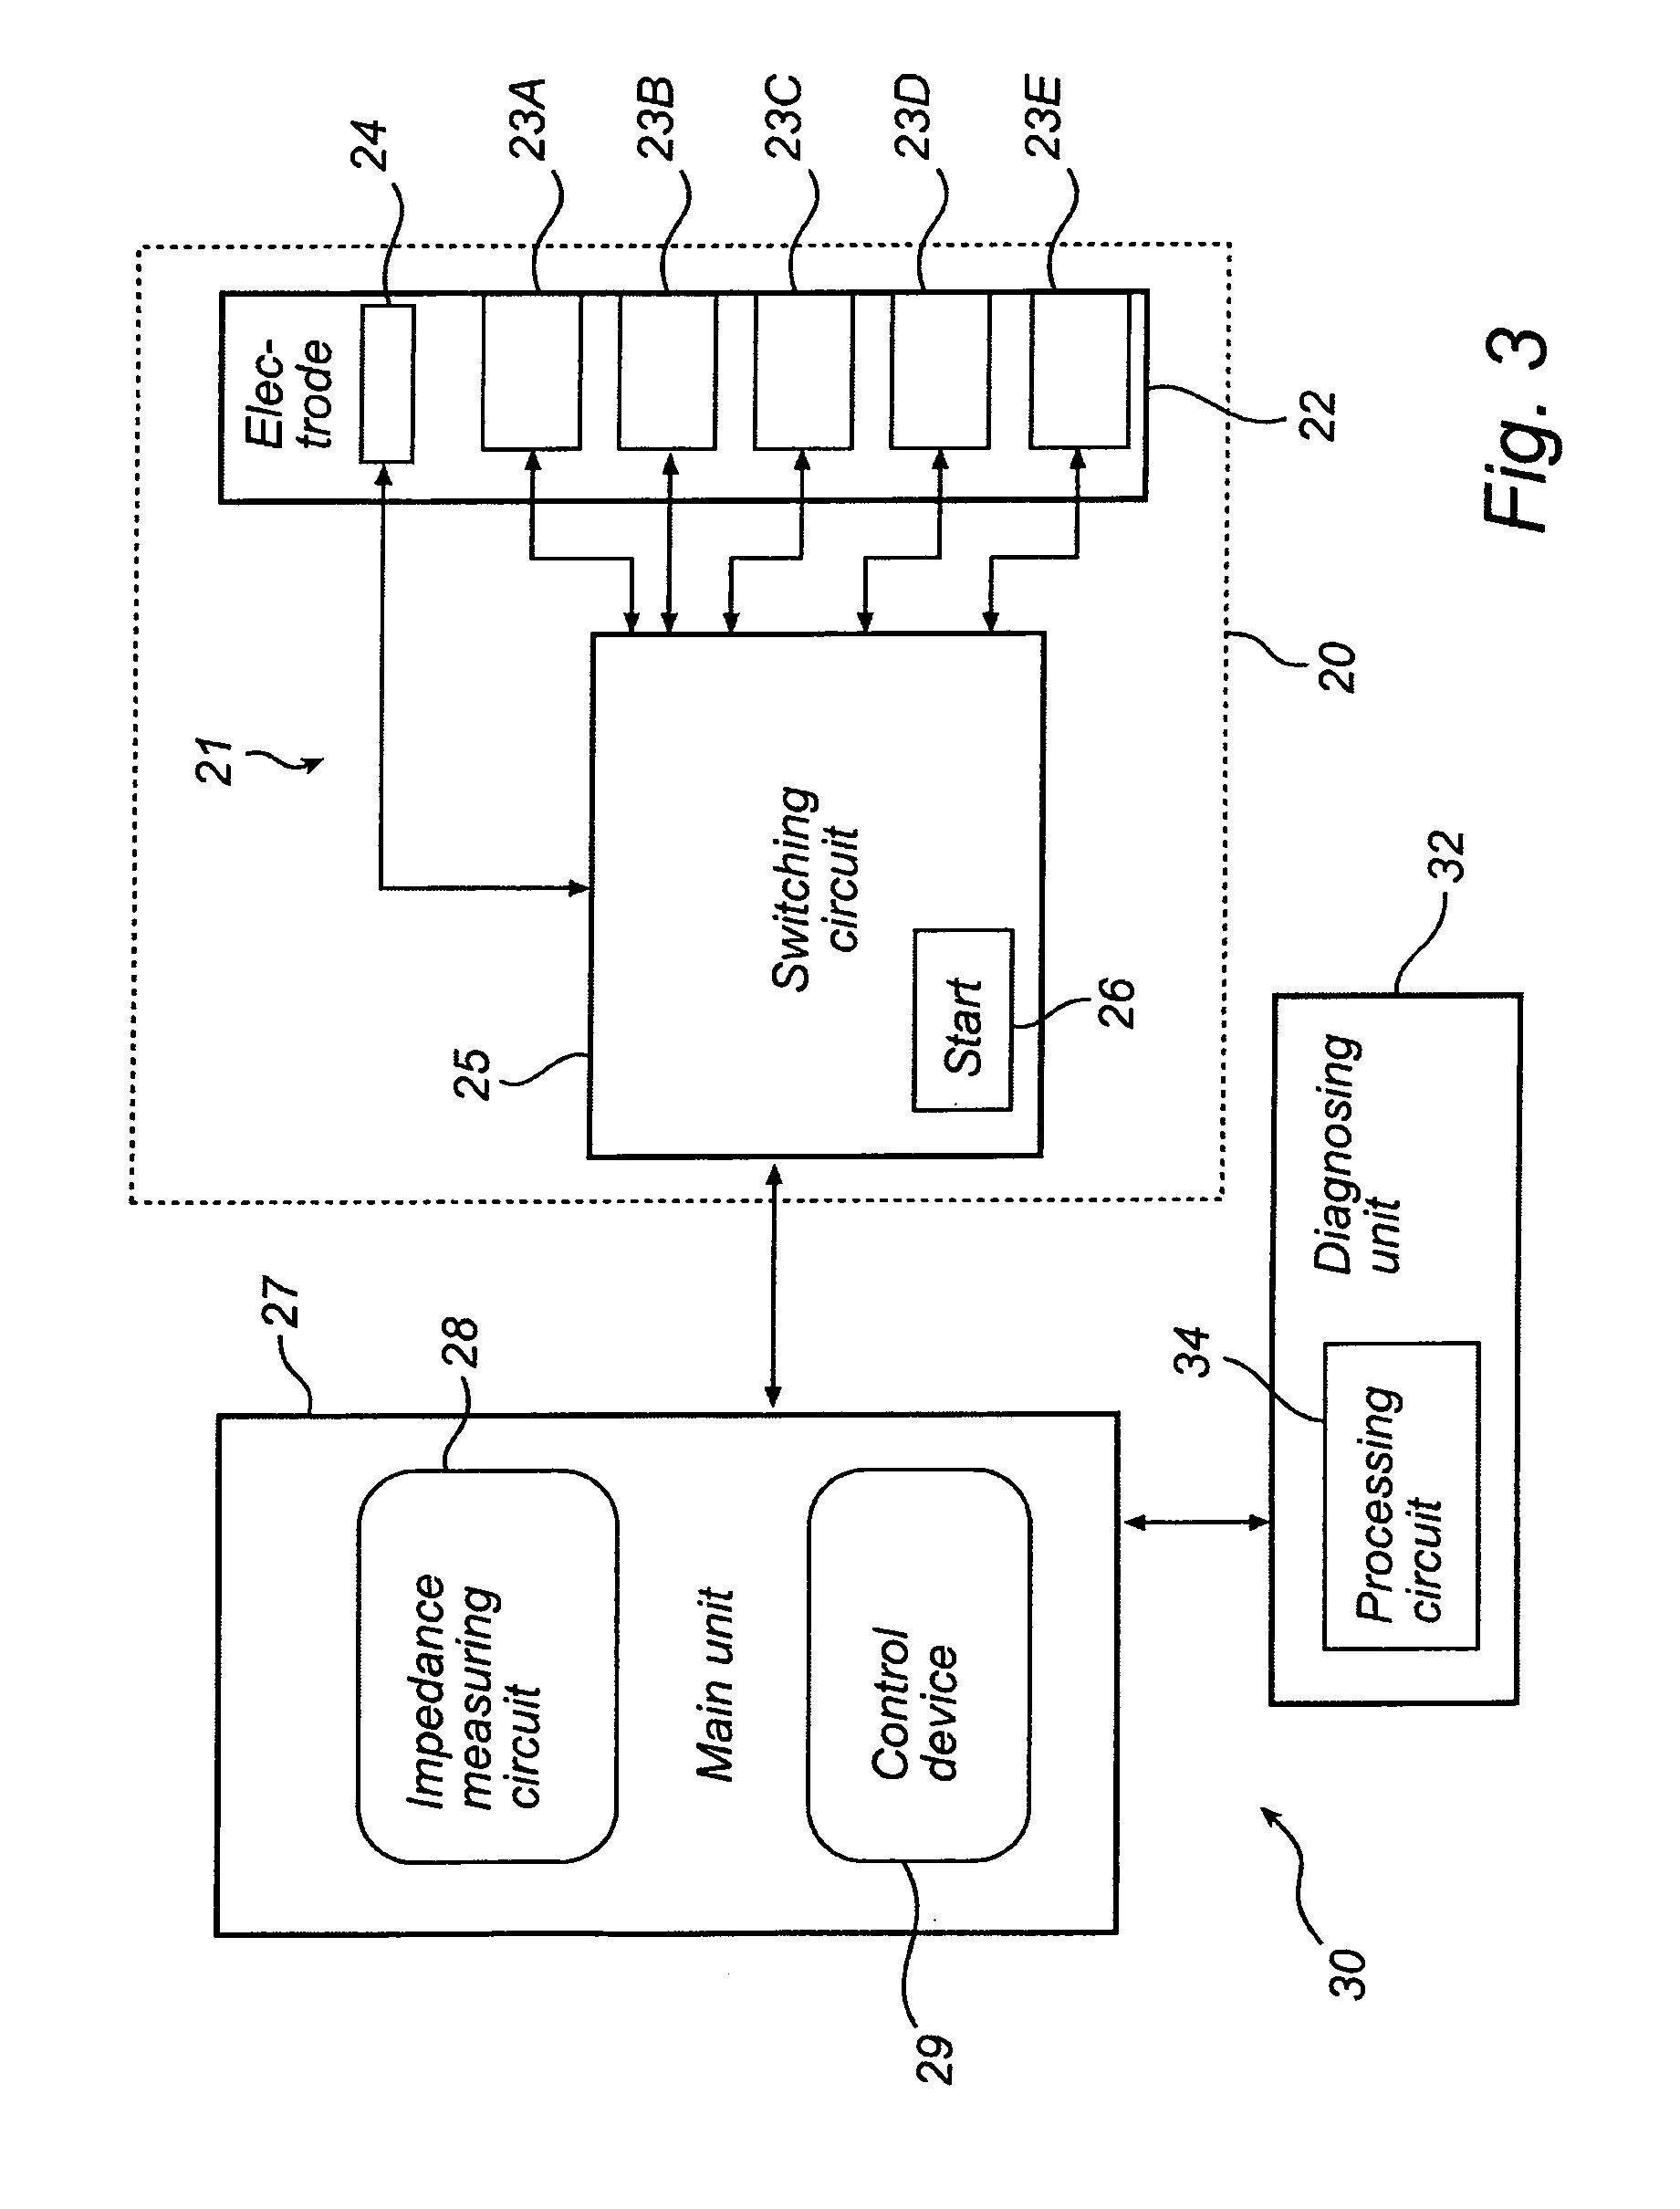 Switch probe for multiple electrode measurement of impedance